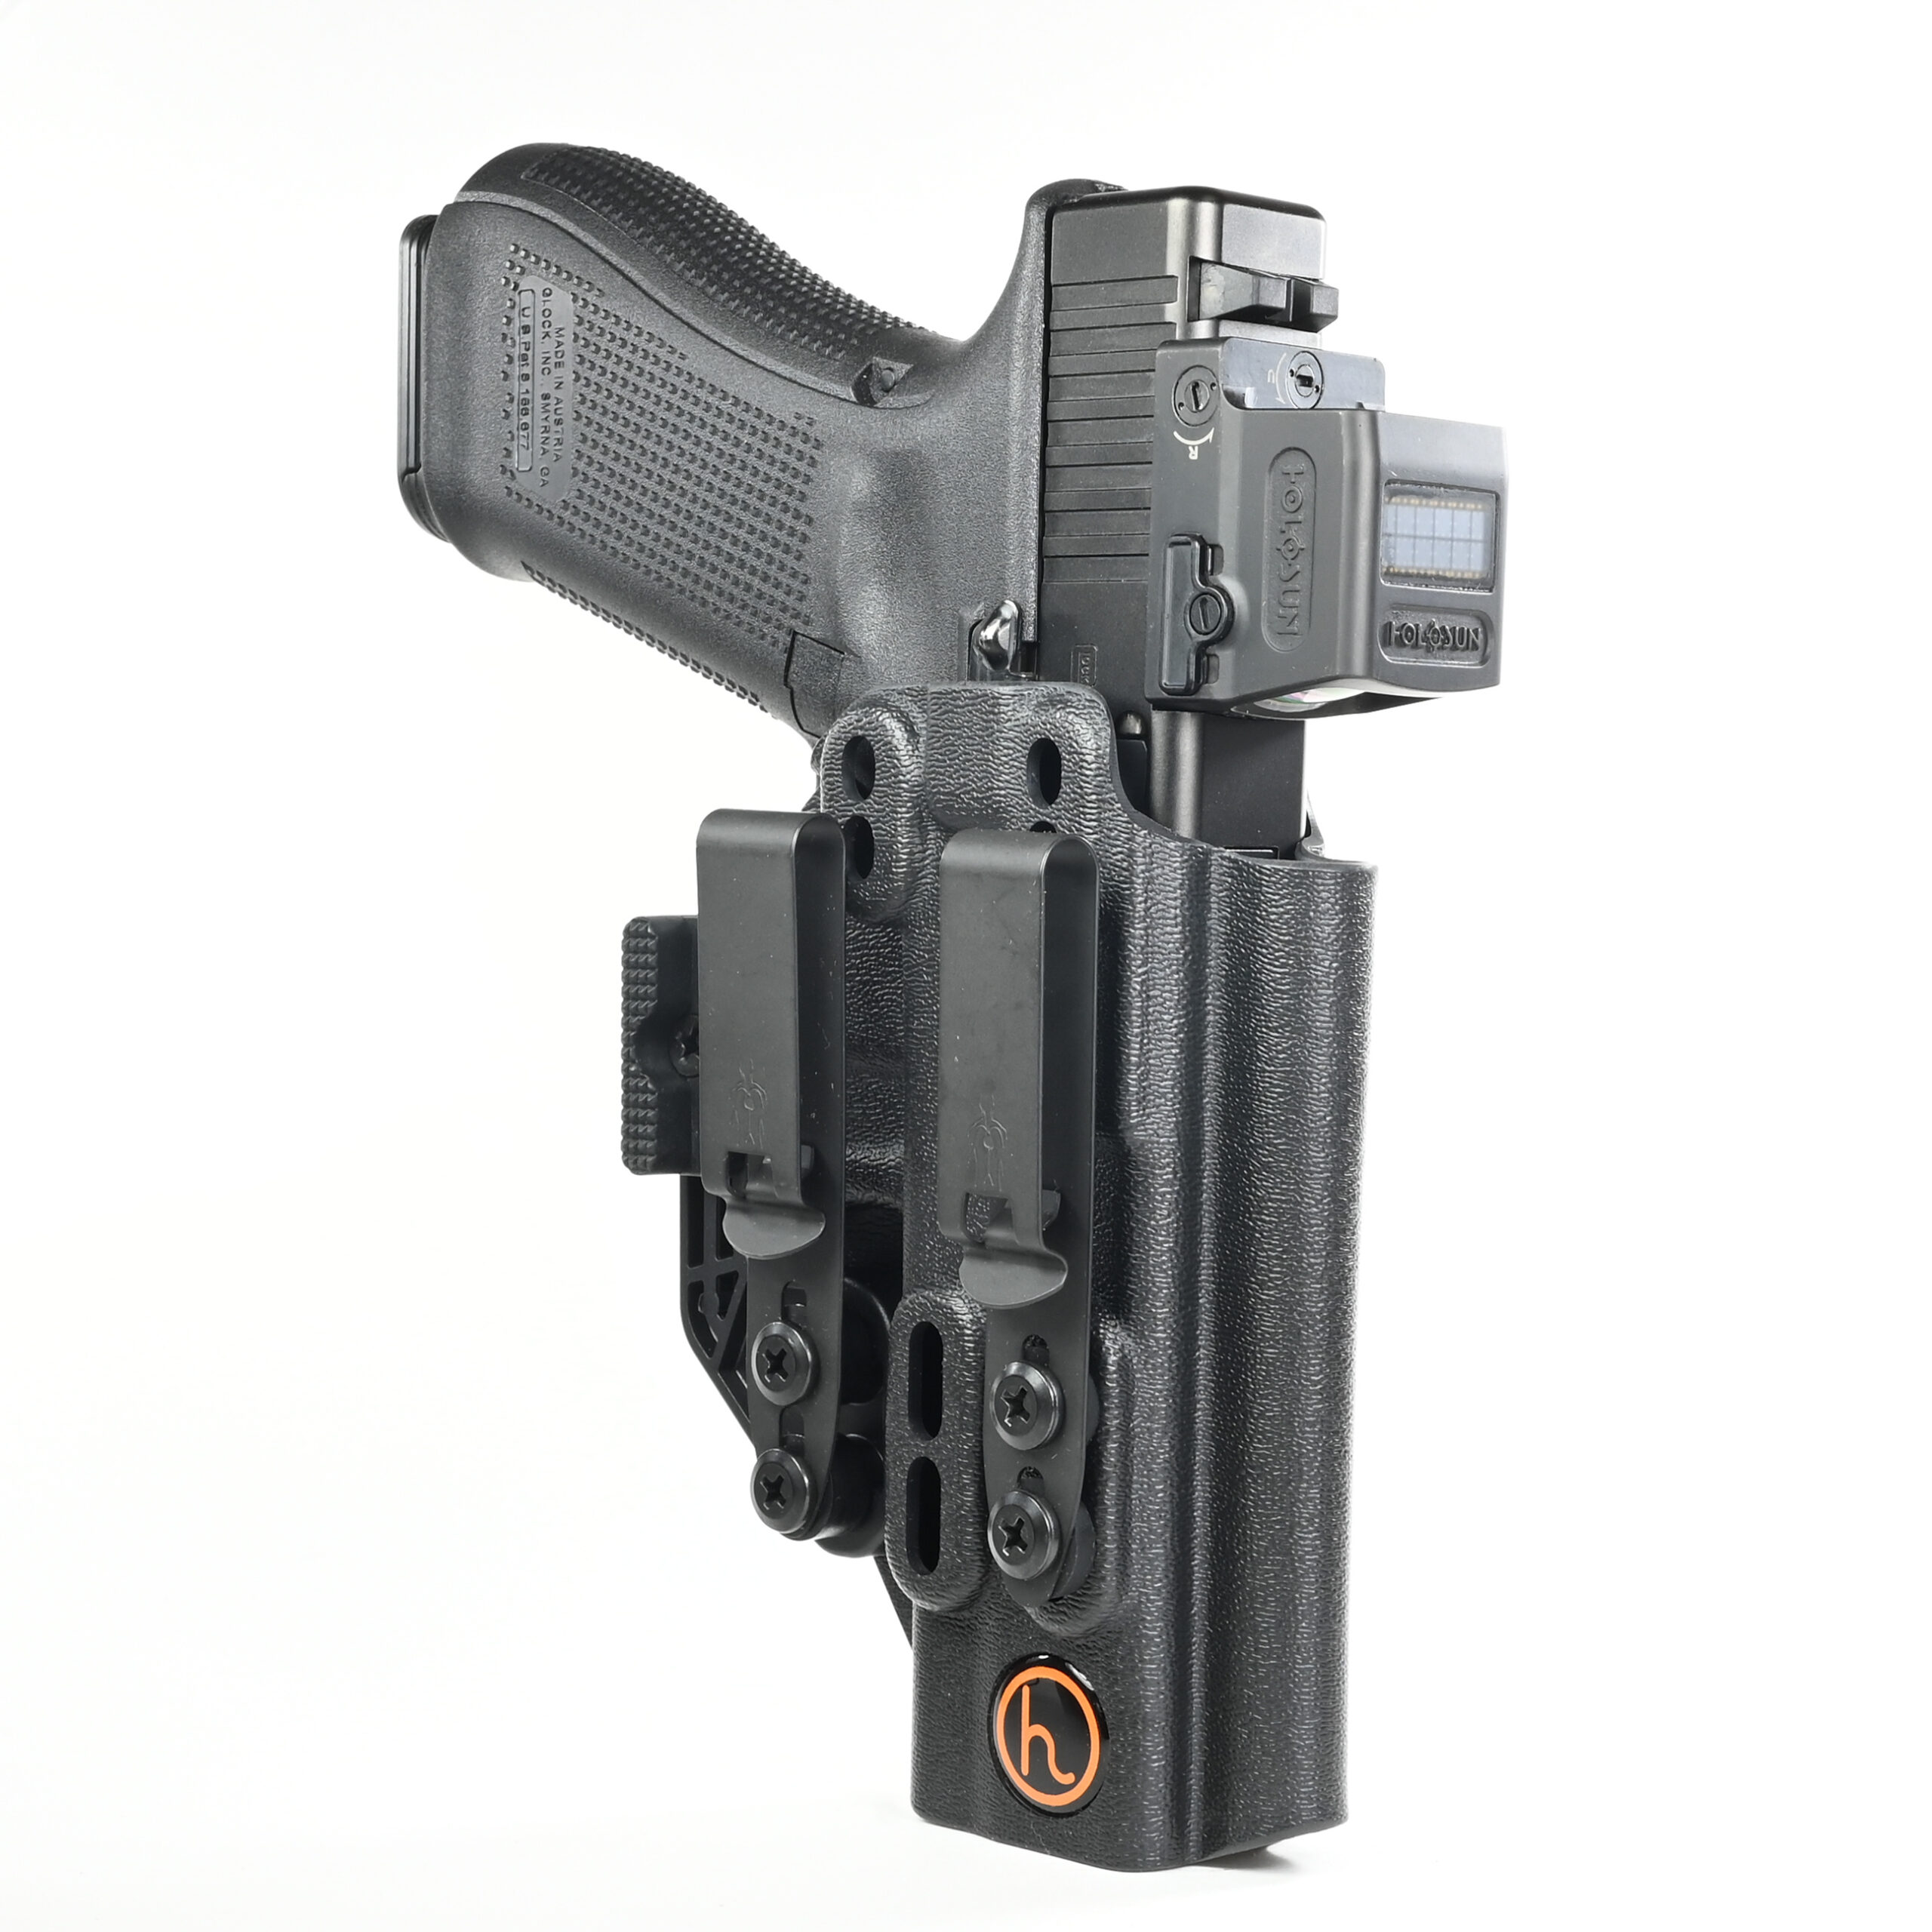 Flint AIWB/IWB Holster back with DCC clips